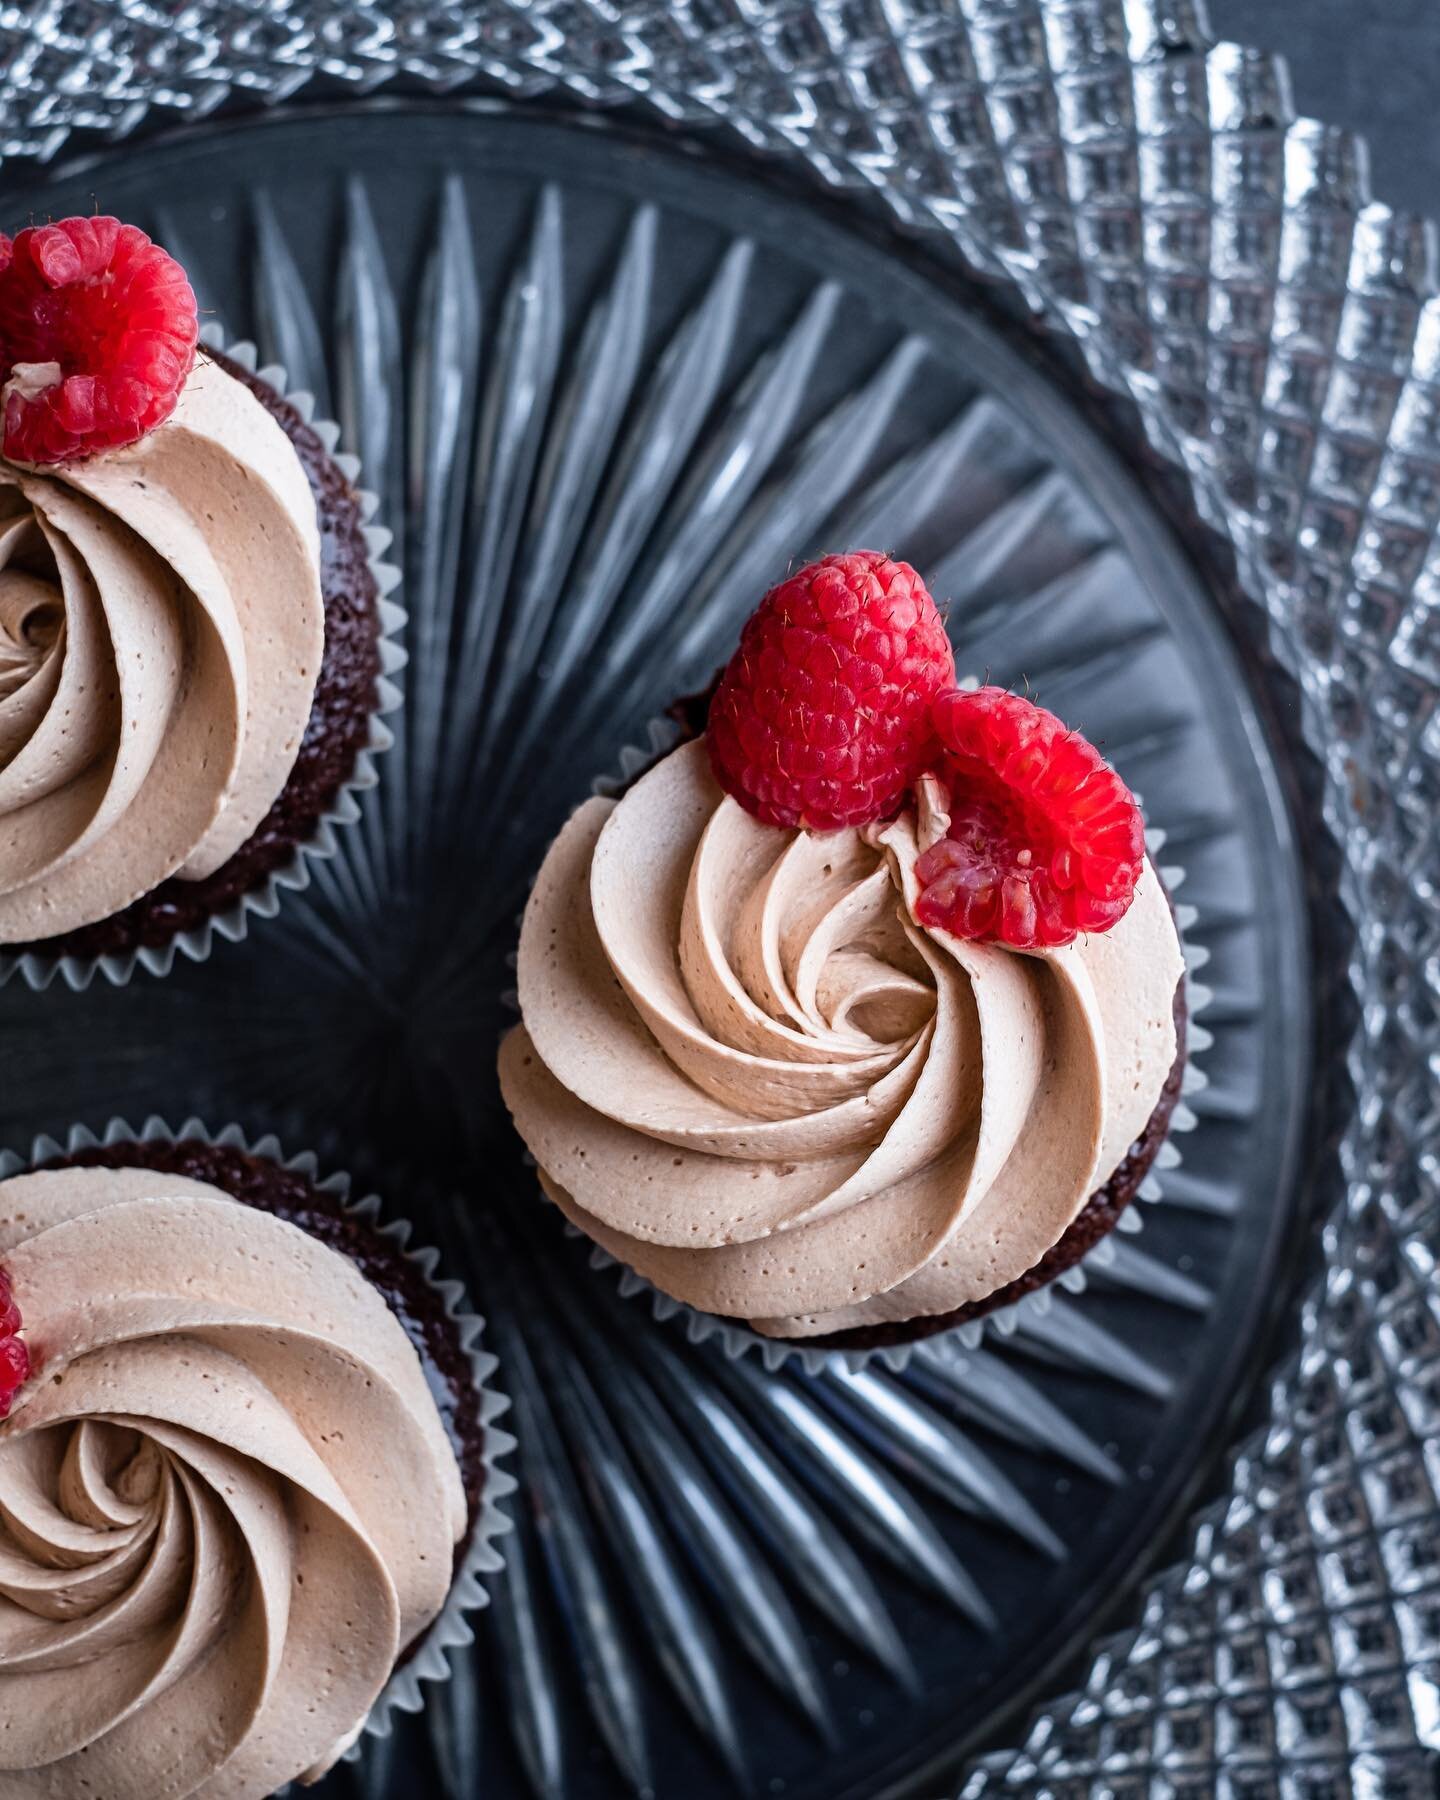 Dreaming about those decadent Bailey&rsquo;s Chocolate Raspberry Cupcakes 🧁
.
I think I did a pretty darn good job on those silky buttercream!!! I actually made these when I was trying to clean out my fridge before we moved 😆😆sometimes food inspo 